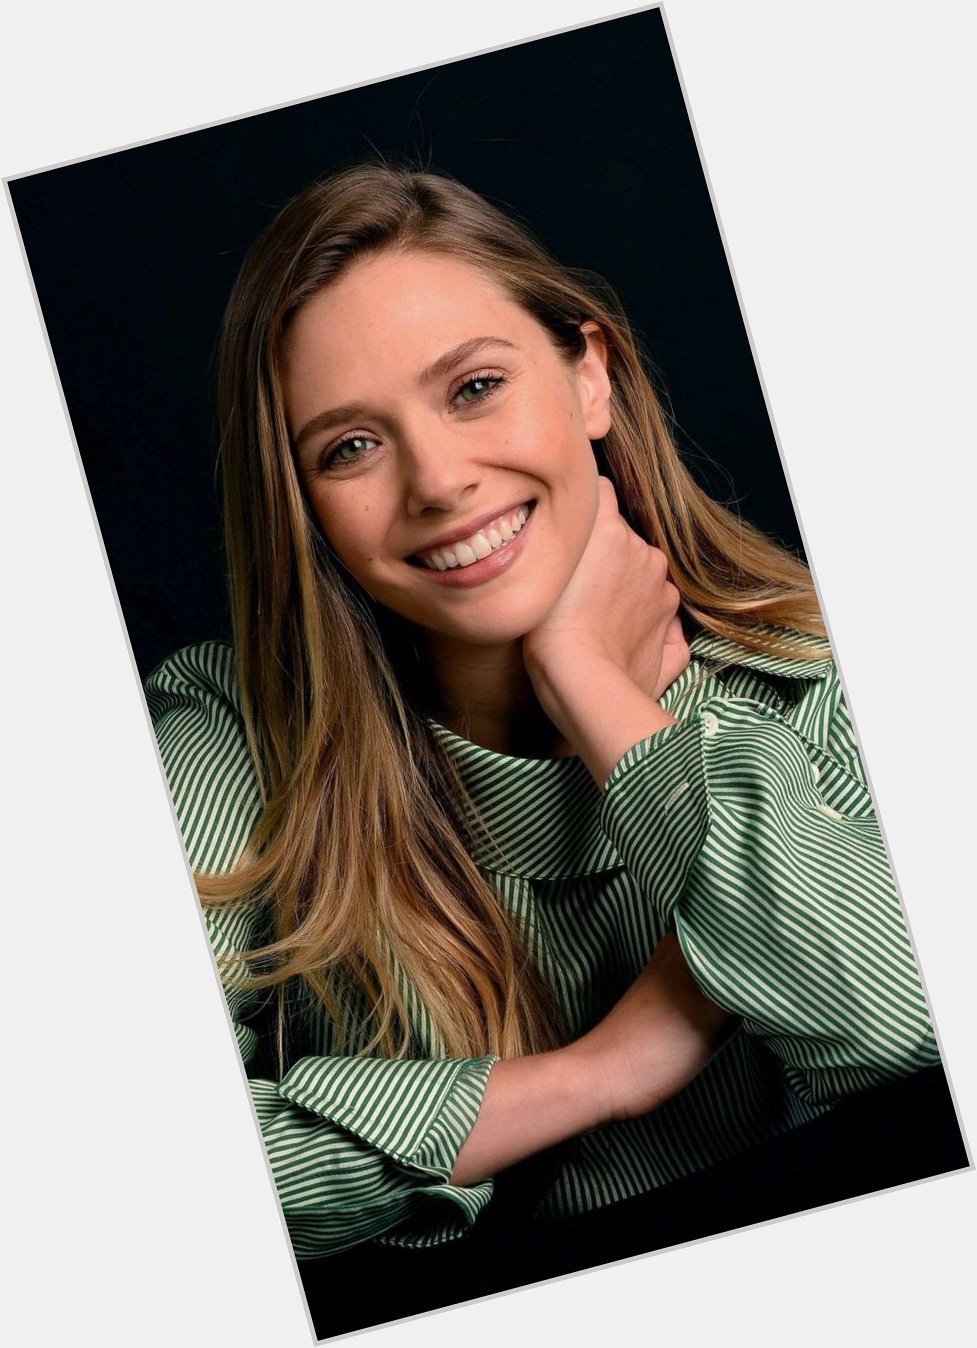 Happy birthday to the beautifully talented Elizabeth Olsen! She s got the smile that makes me smile. 